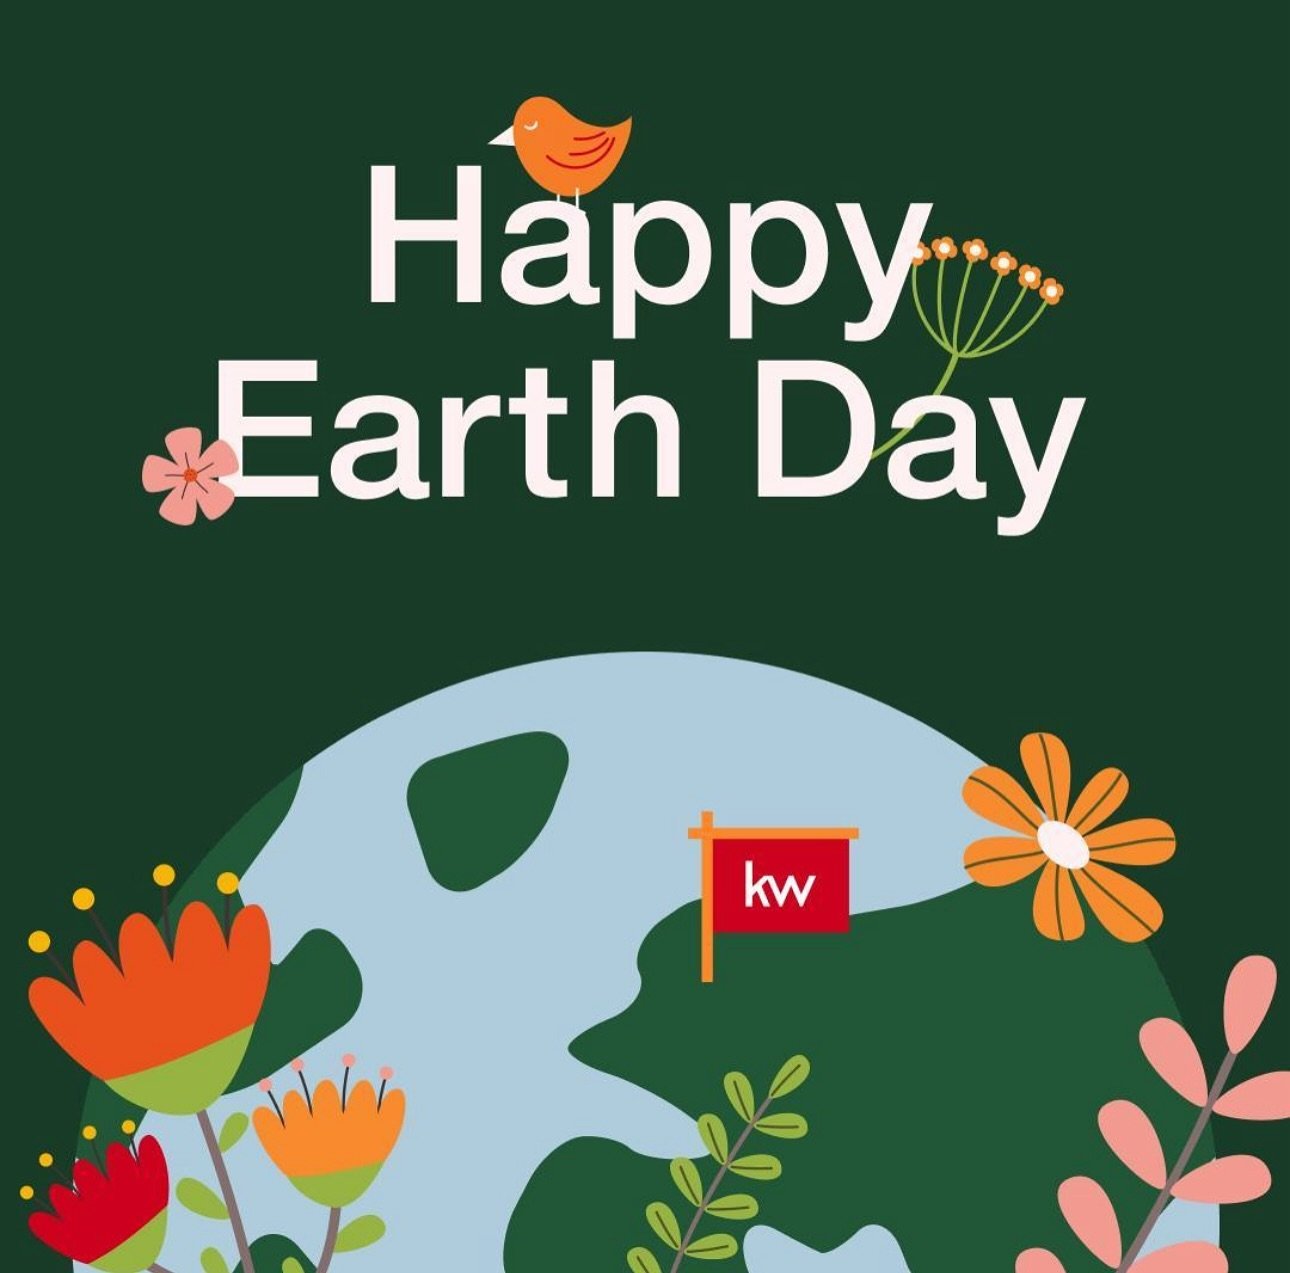 Celebrating our forever home!!
At Keller Williams, we're dedicated to protecting our planet and preserving its beauty for future generations, because the best investment on Earth is Earth itself! #kellerwilliamsrealty